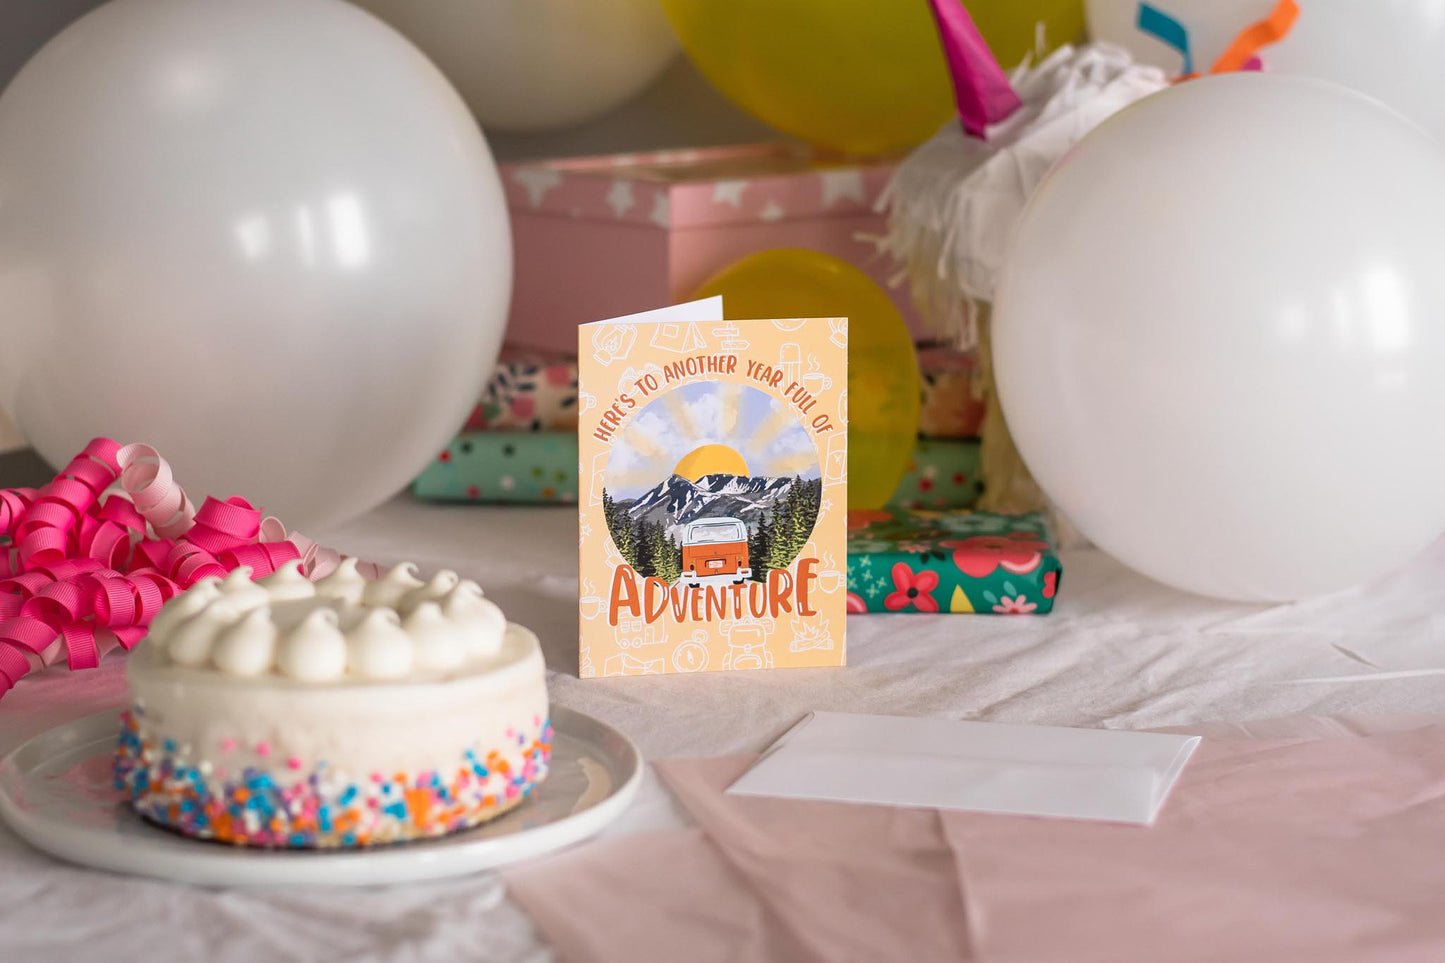 Here's To Another Year Full Of Adventure - Greeting Card